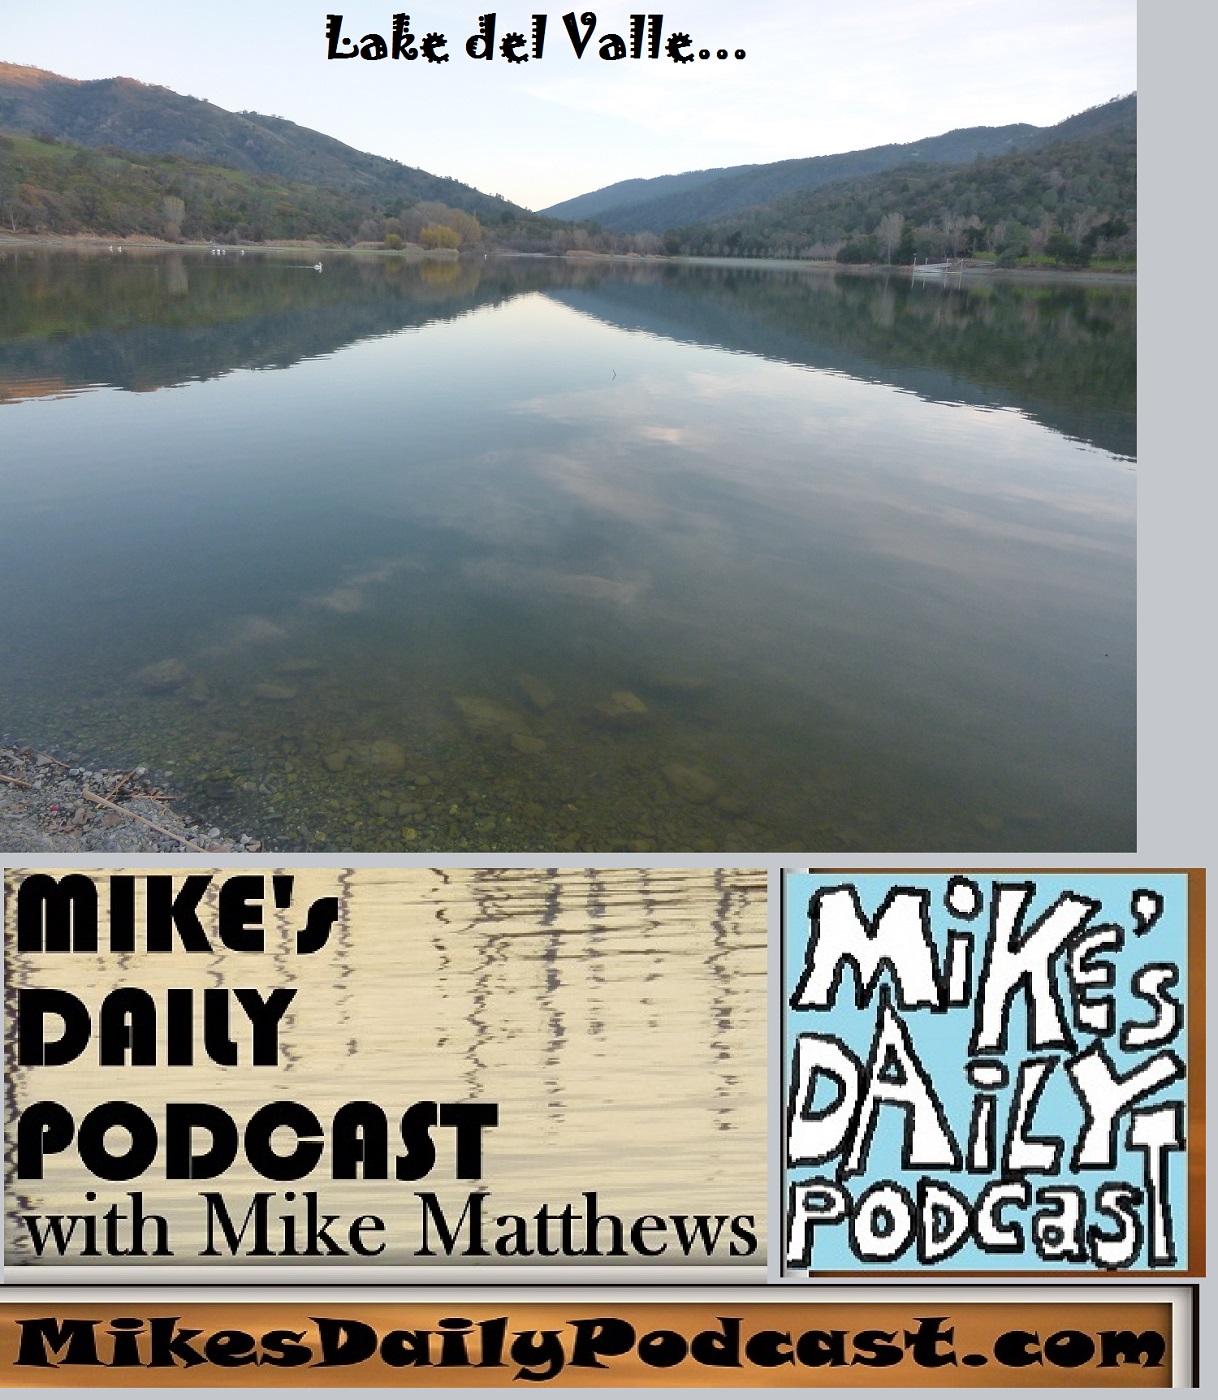 MIKEs DAILY PODCAST 1113 Lake del Valle